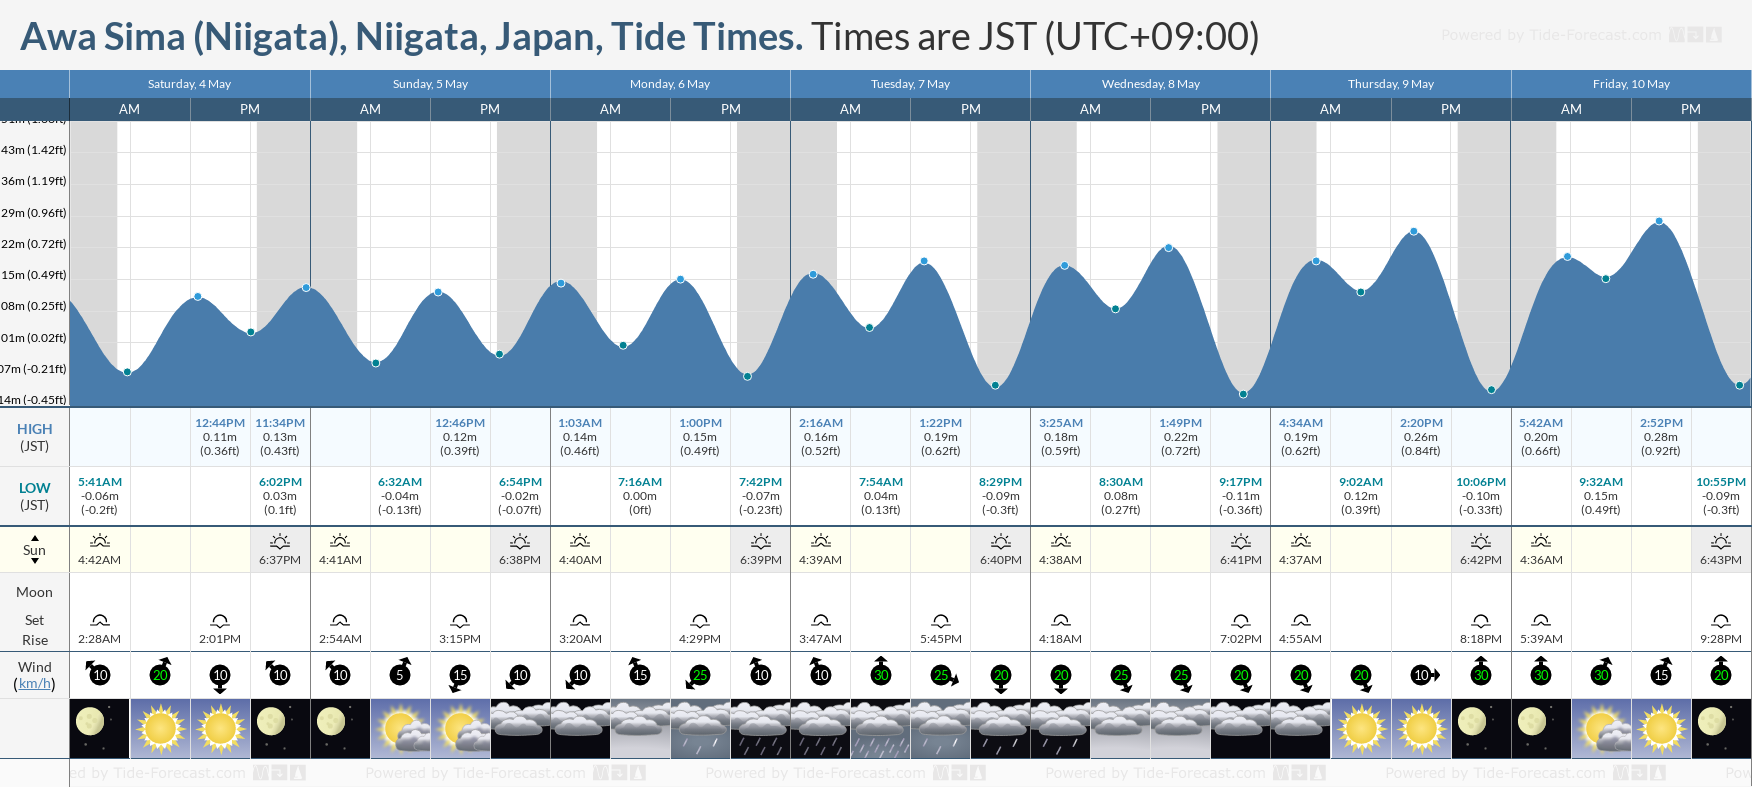 Awa Sima (Niigata), Niigata, Japan Tide Chart including high and low tide times for the next 7 days